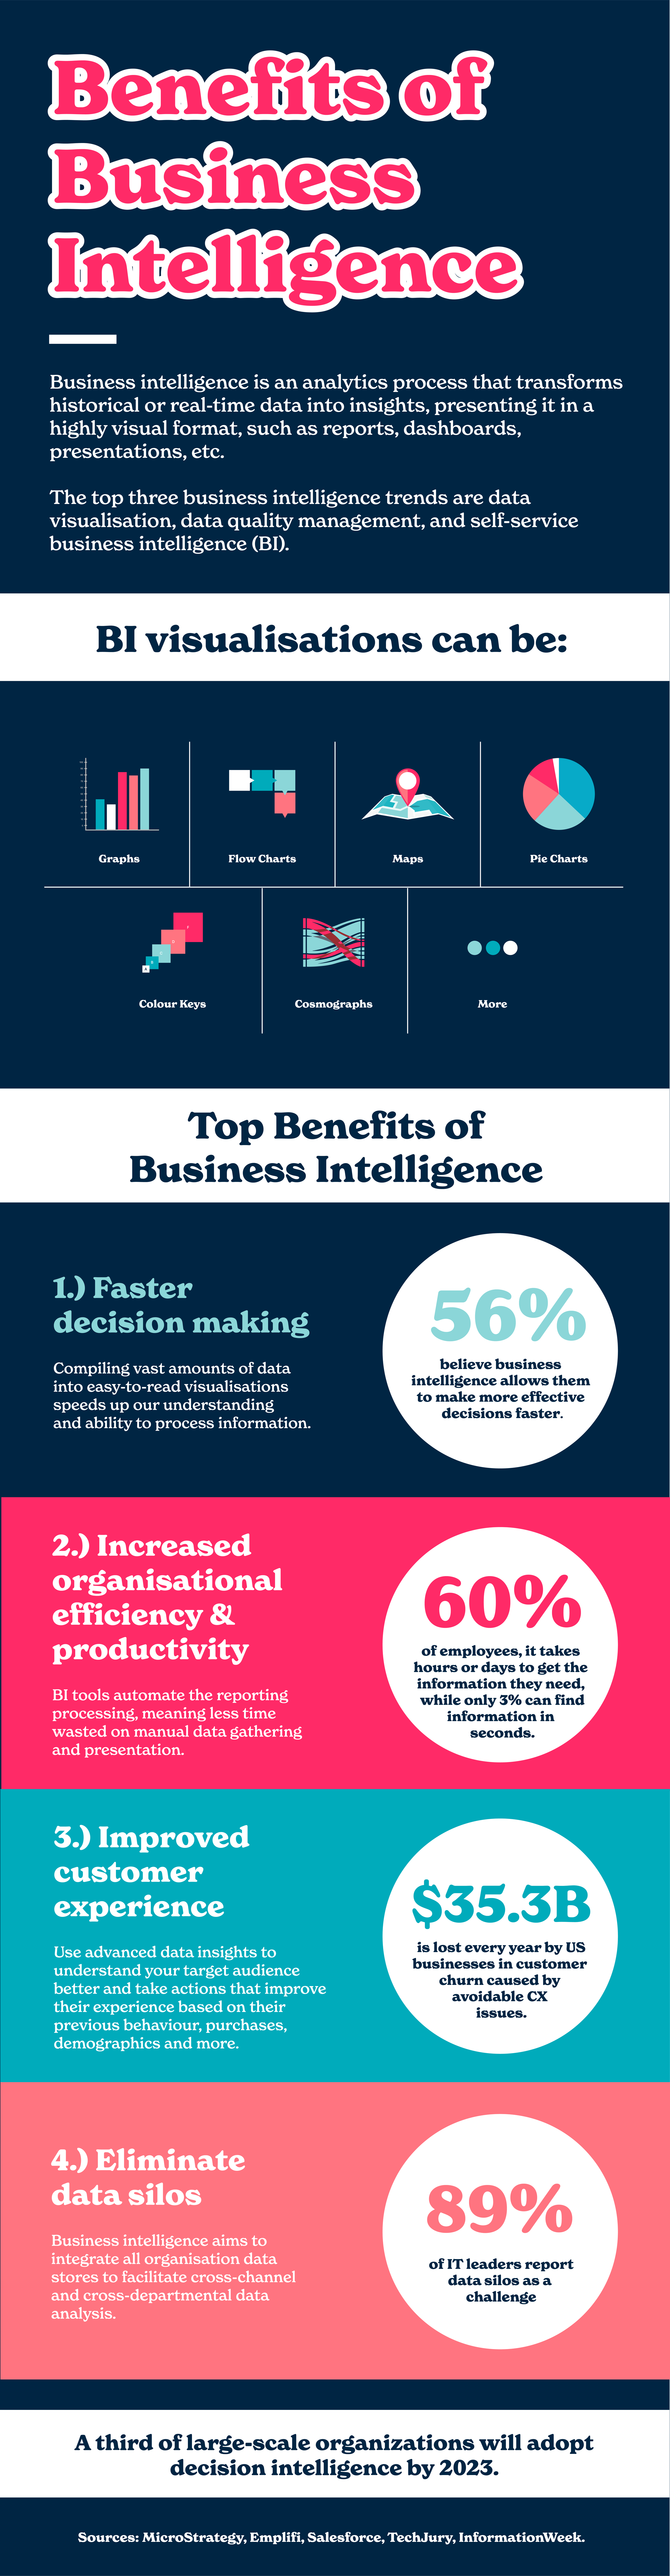 Benefits of Business Intelligence- infographic